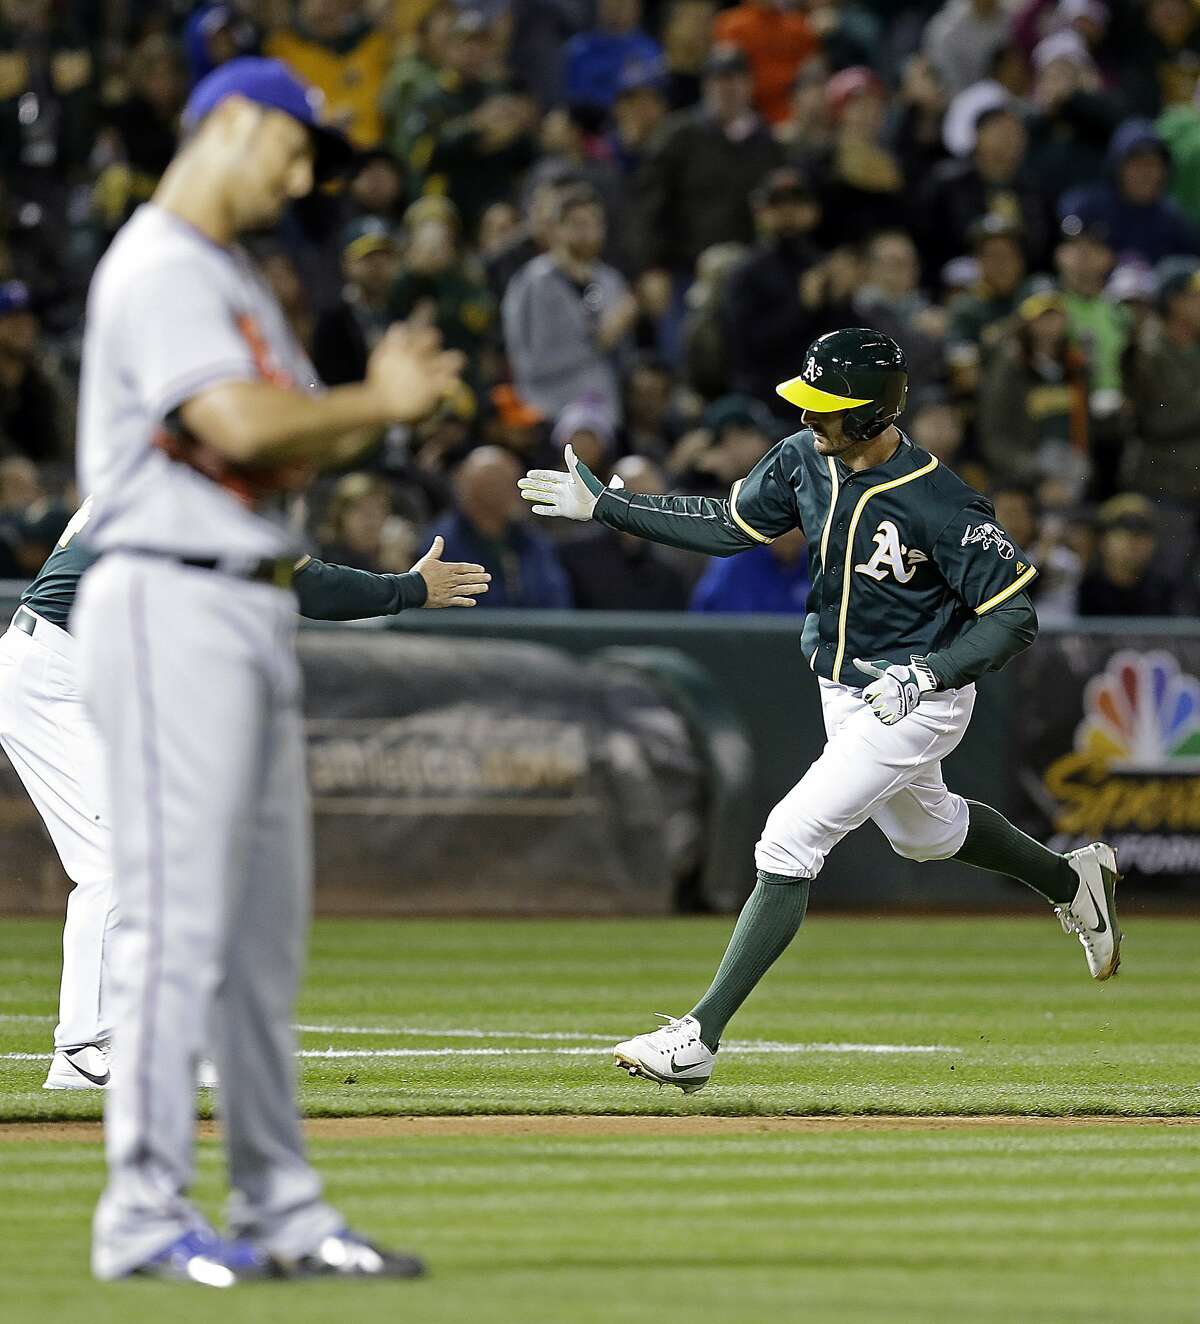 Oakland Athletics' Adam Rosales, right, celebrates as he rounds third base after hitting a two-run home run off Texas Rangers' Yu Darvish, foreground, during the sixth inning of a baseball game Tuesday, April 18, 2017, in Oakland, Calif. (AP Photo/Ben Margot)